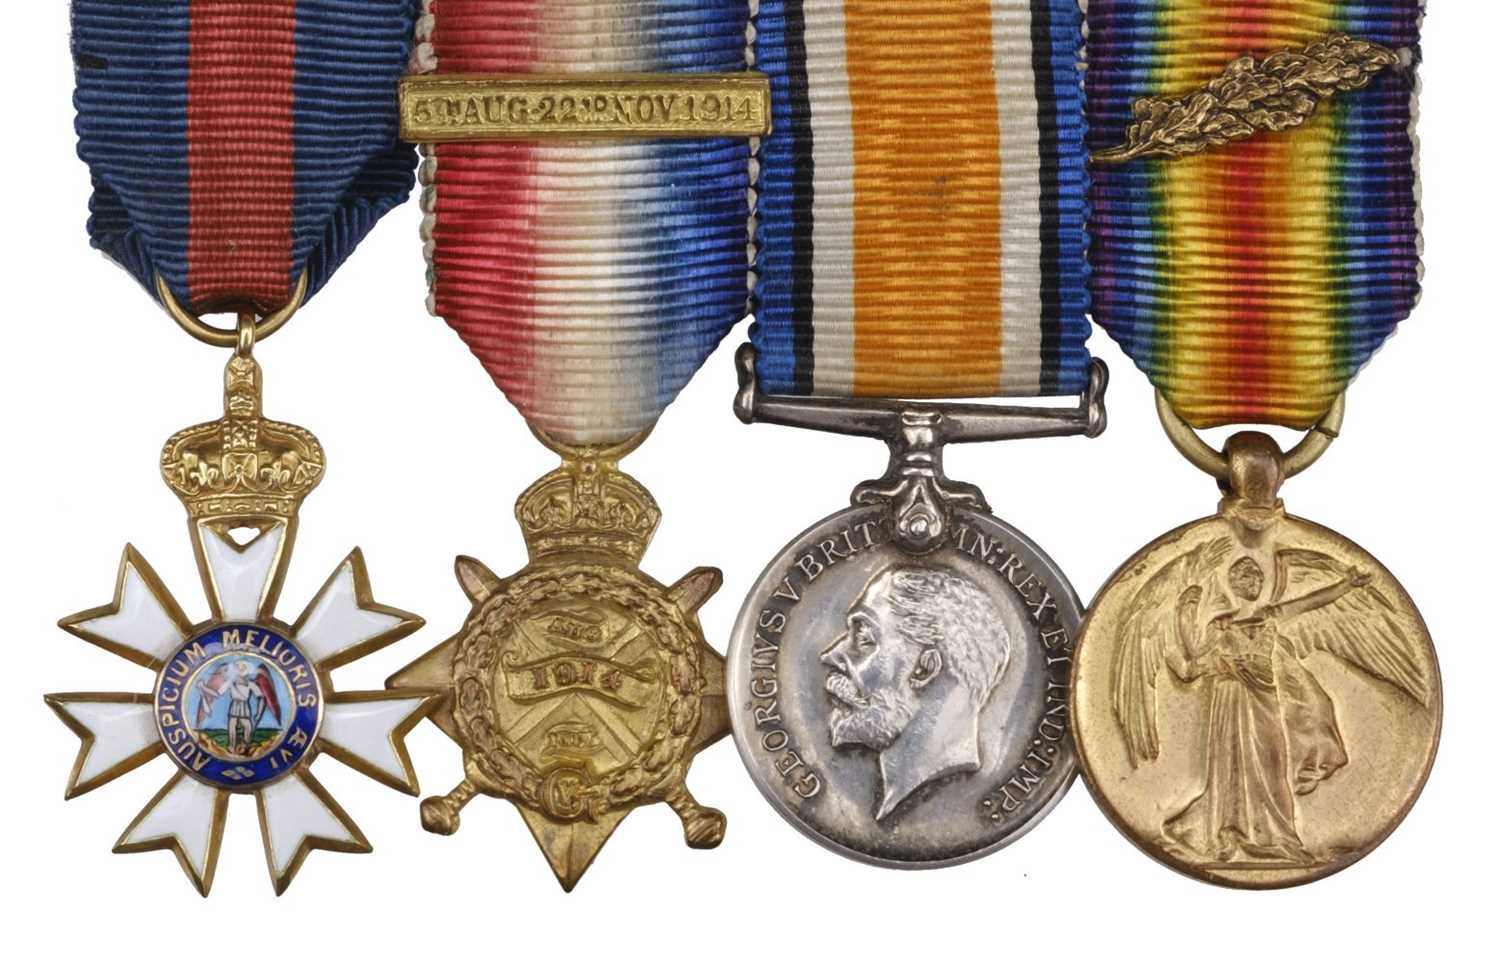 Lot 42 - Miniature dress medals attributed to Reverend A.R. Yeoman, Deputy Chaplain General